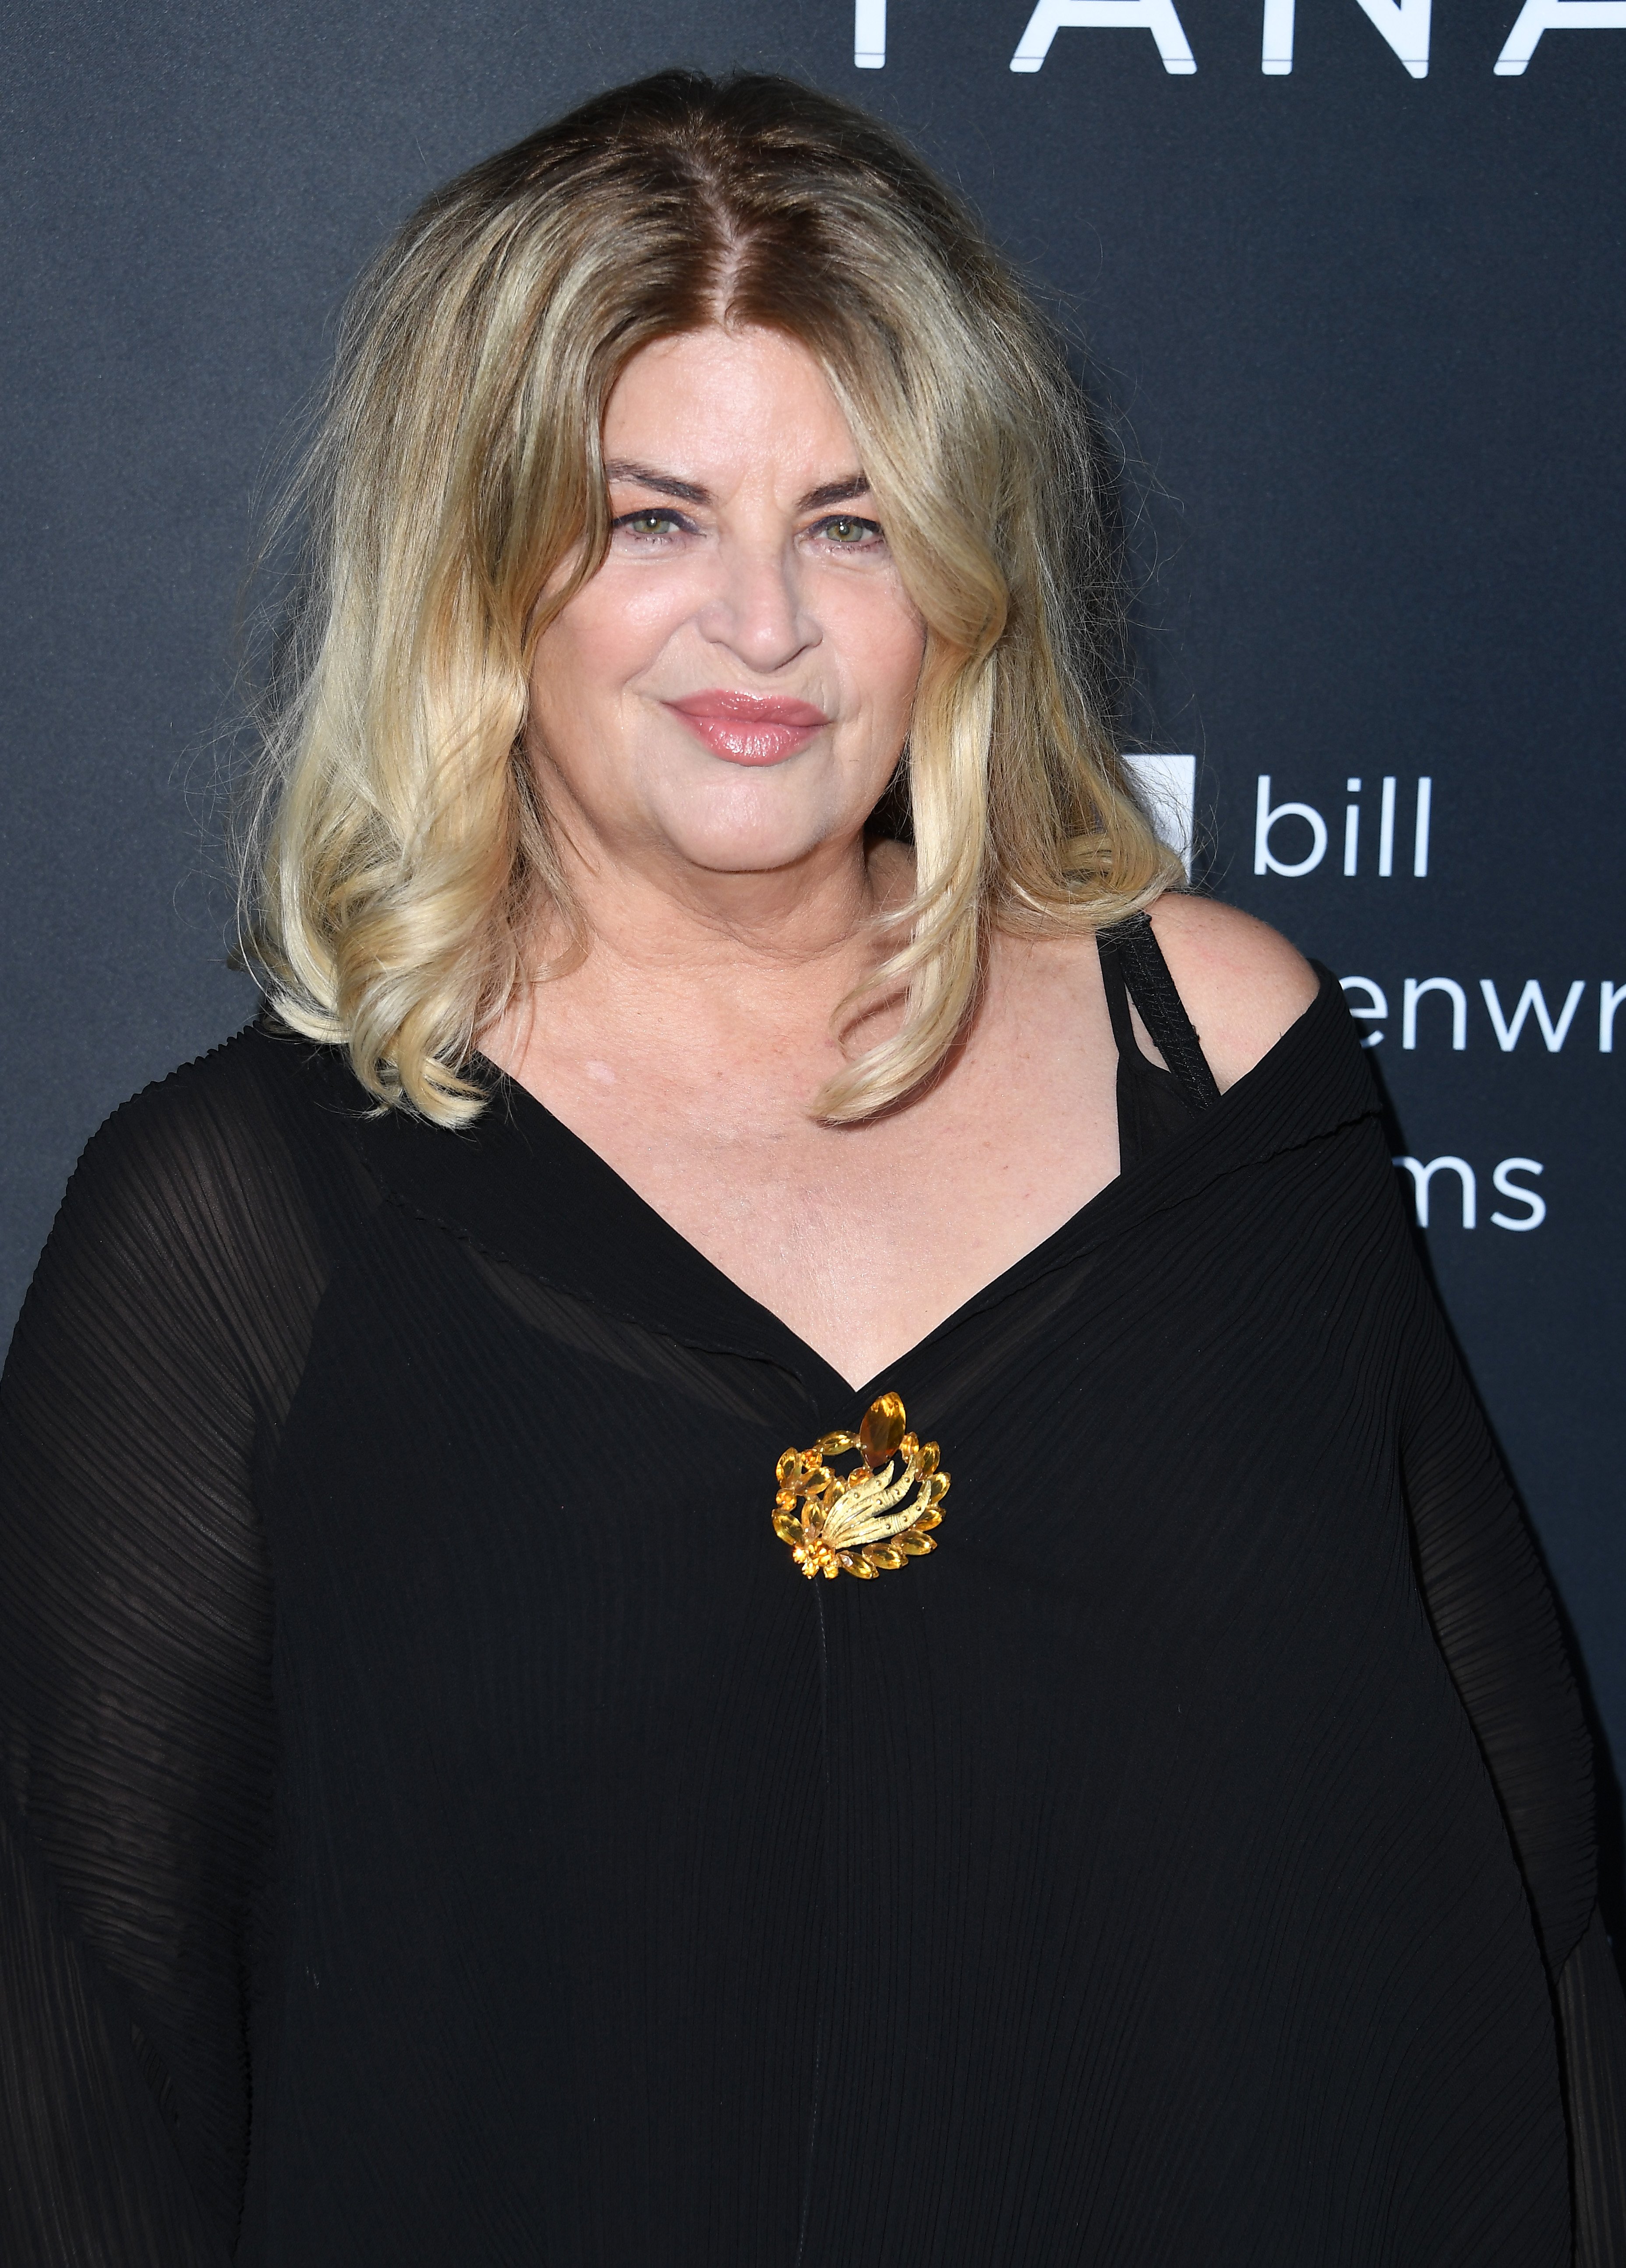 Kirstie Alley arrives at the Premiere Of Quiver Distribution's "The Fanatic" at the Egyptian Theatre on August 22, 2019 in Hollywood, California. | Source: Getty Images